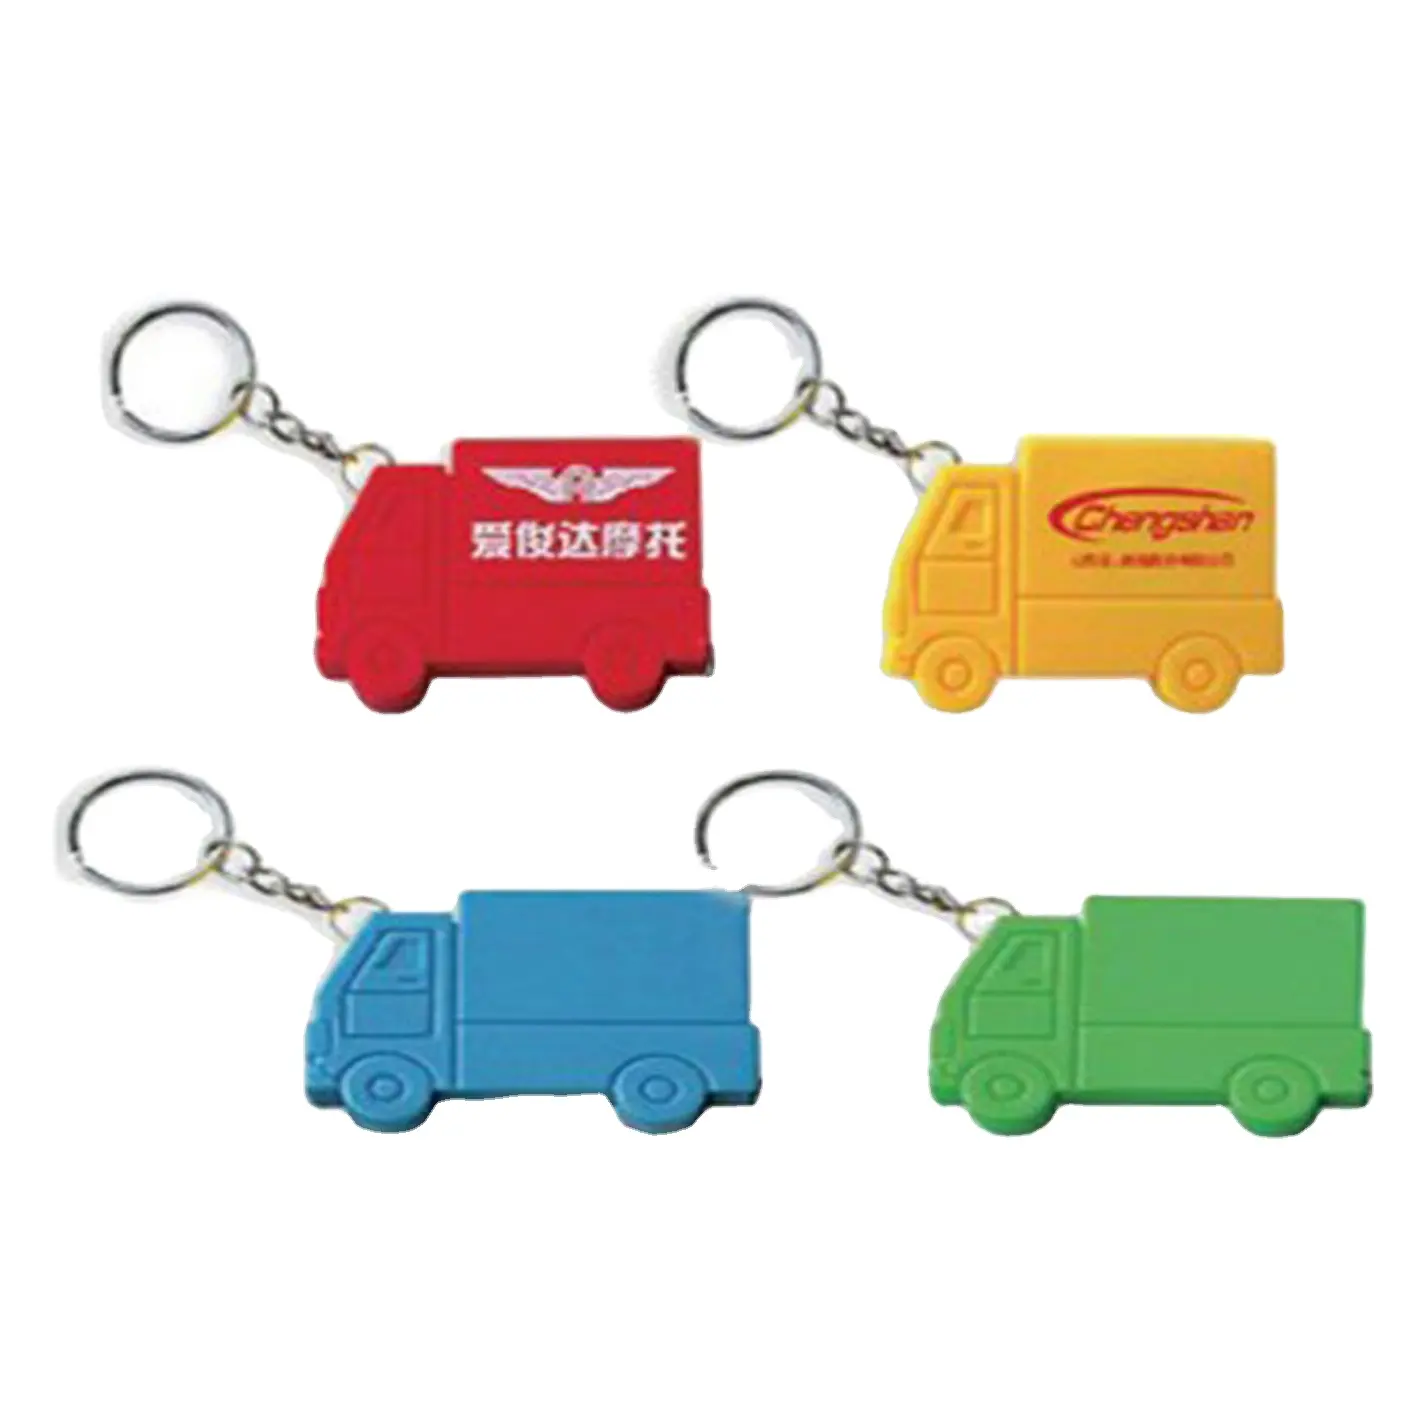 trucks shape stainless steel 1 meter tape measure with key chains inches measuring tape promotional gift